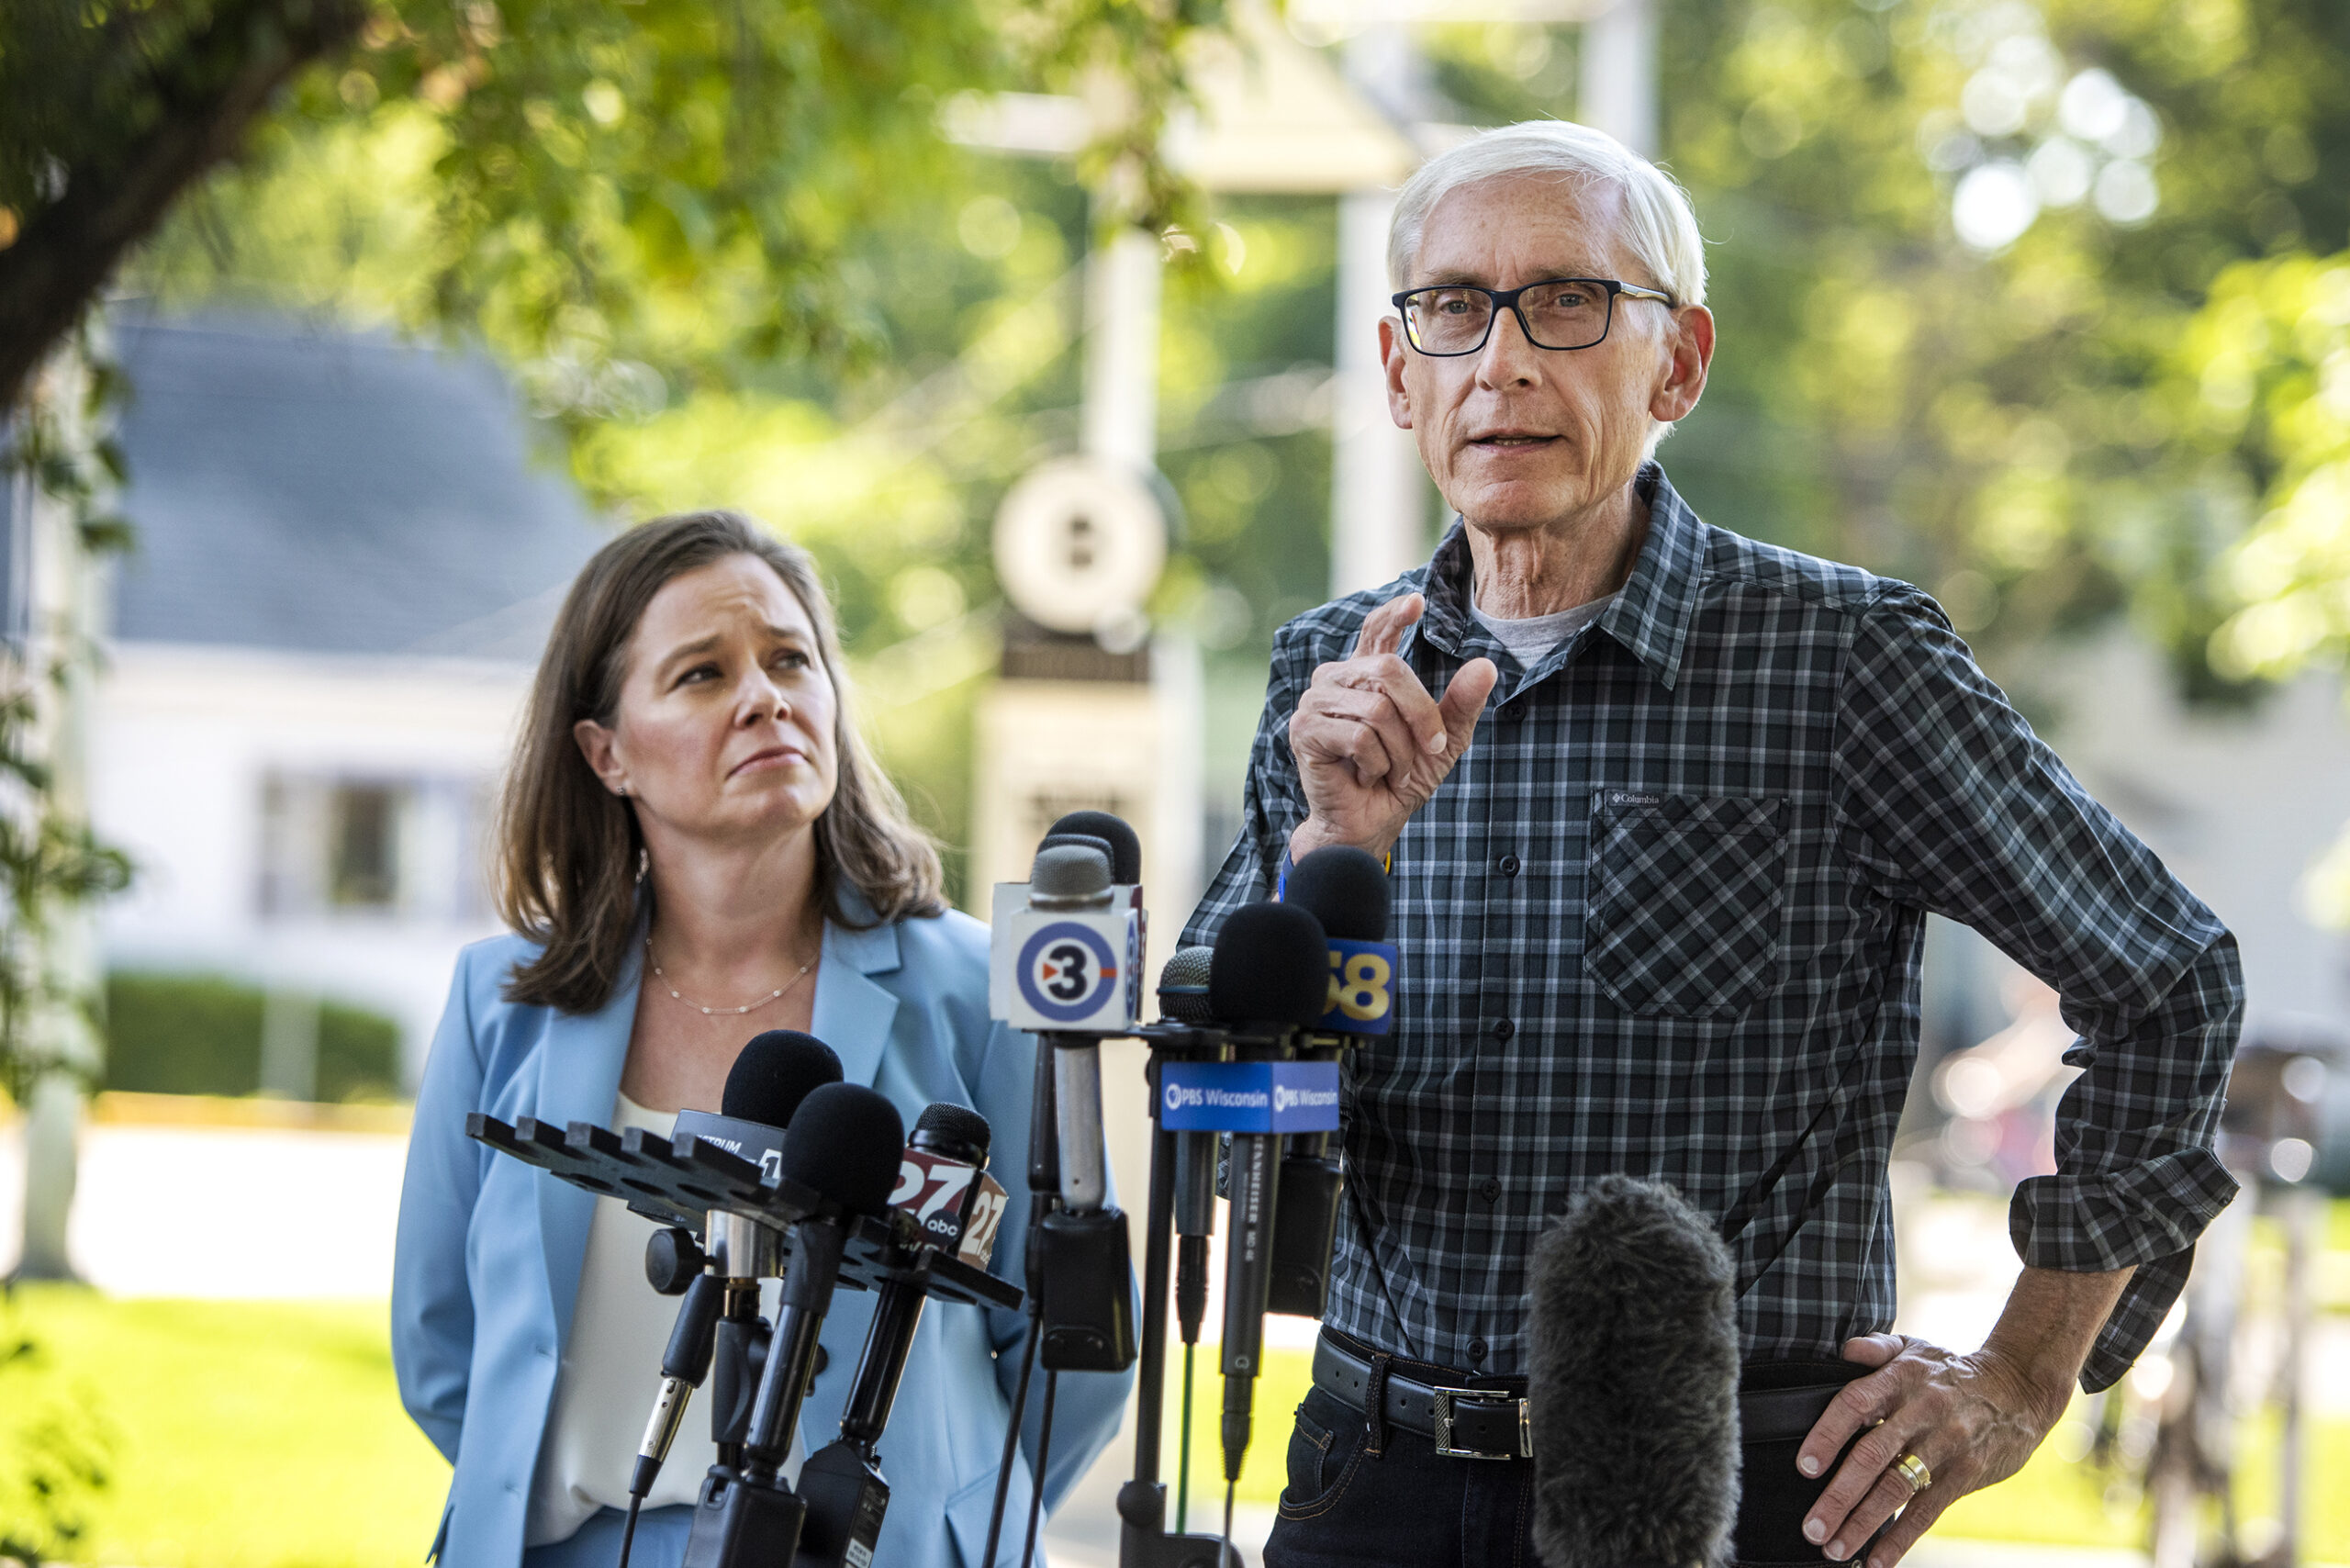 Gov. Tony Evers and Sara Rodriguez stand outside in front of microphones.